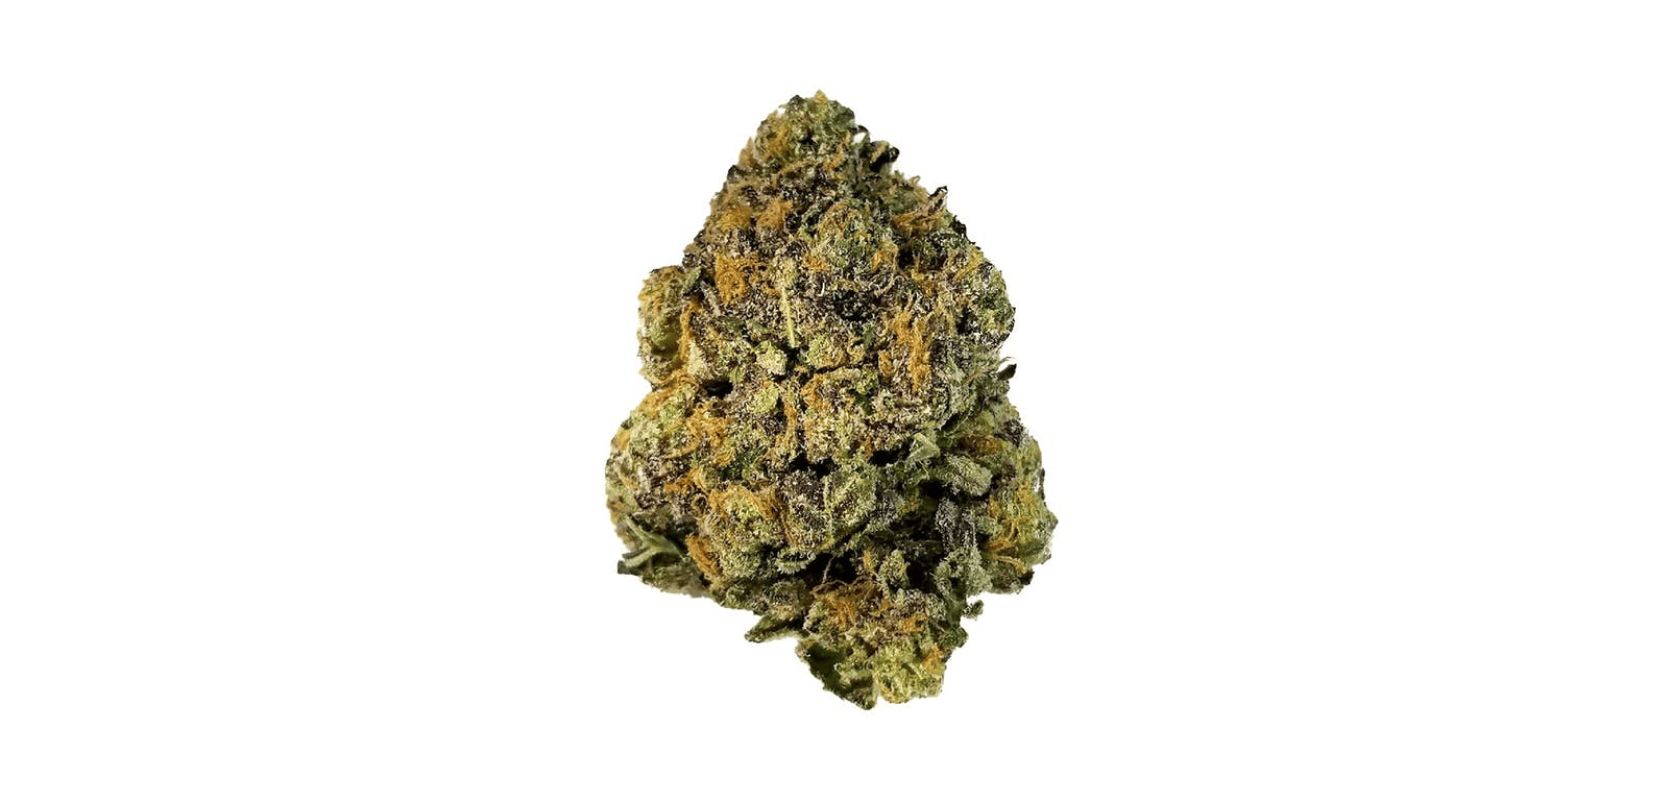 Well, these top ten medical effects of the Rockstar strain will surely help you make a decision. Check out these life-changing effects of the Rockstar OG strain!